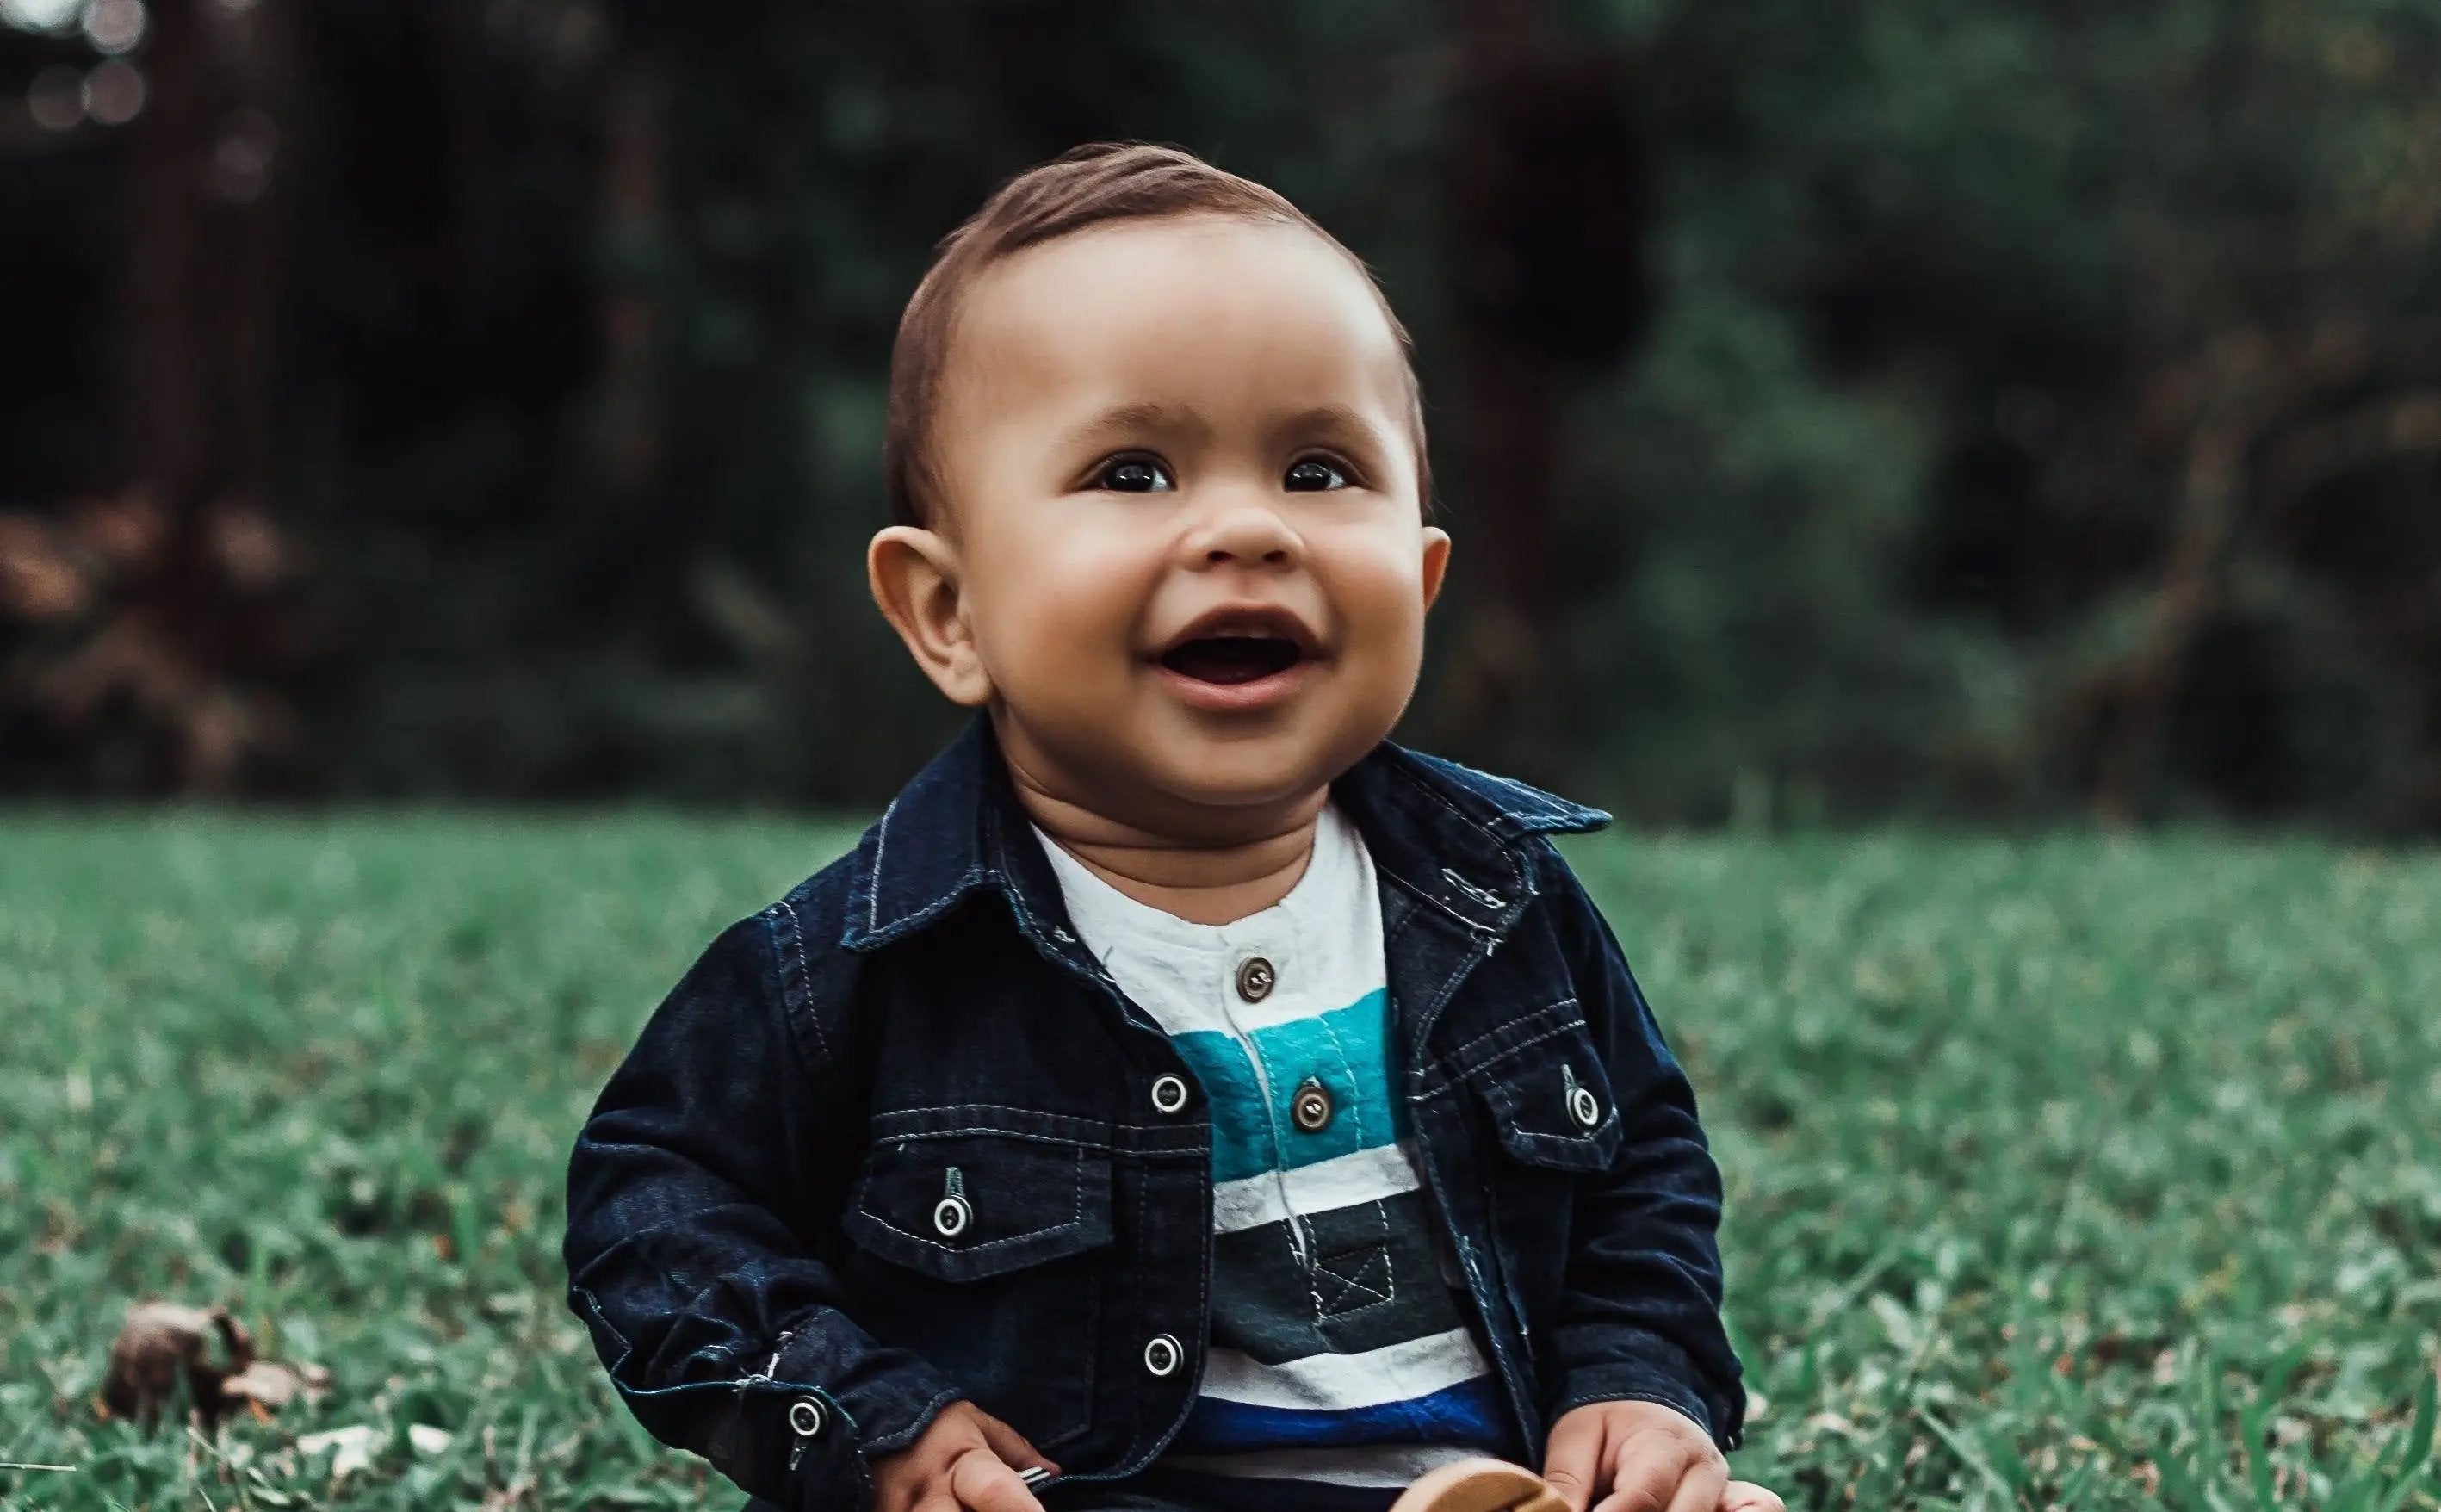 Baby boy smiling on the grass in jacket and stripy shirt.